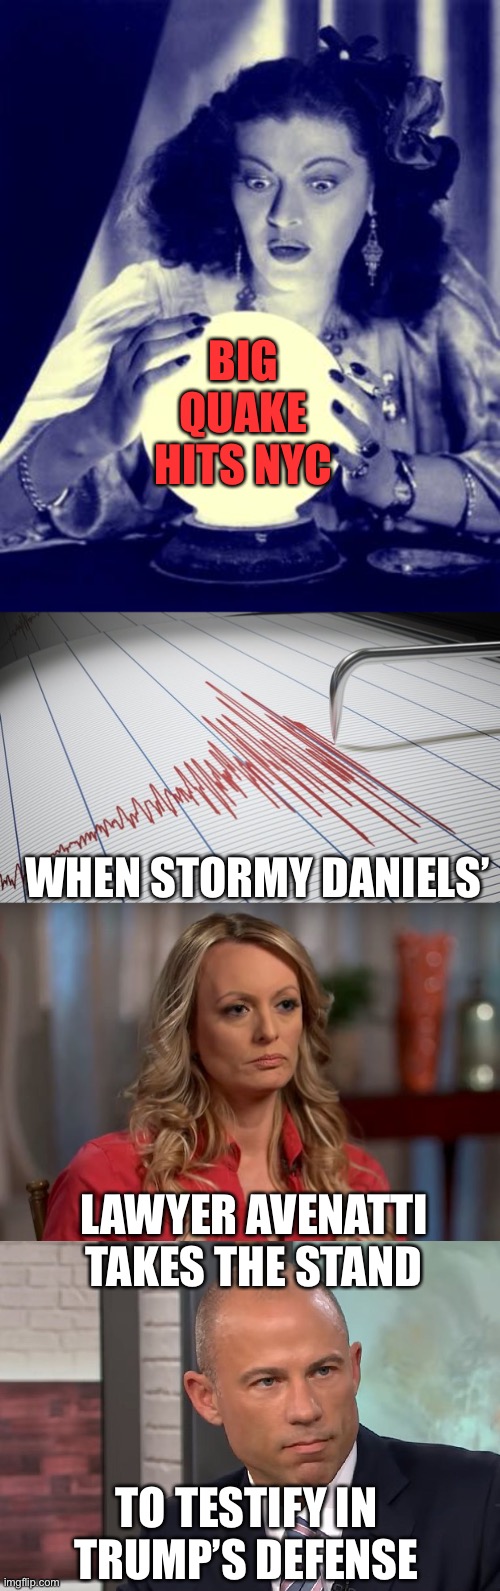 The big one is coming! | BIG QUAKE HITS NYC; WHEN STORMY DANIELS’; LAWYER AVENATTI TAKES THE STAND; TO TESTIFY IN TRUMP’S DEFENSE | image tagged in crystal ball,seismograph,stormy daniels,michael avenatti stormy daniels | made w/ Imgflip meme maker